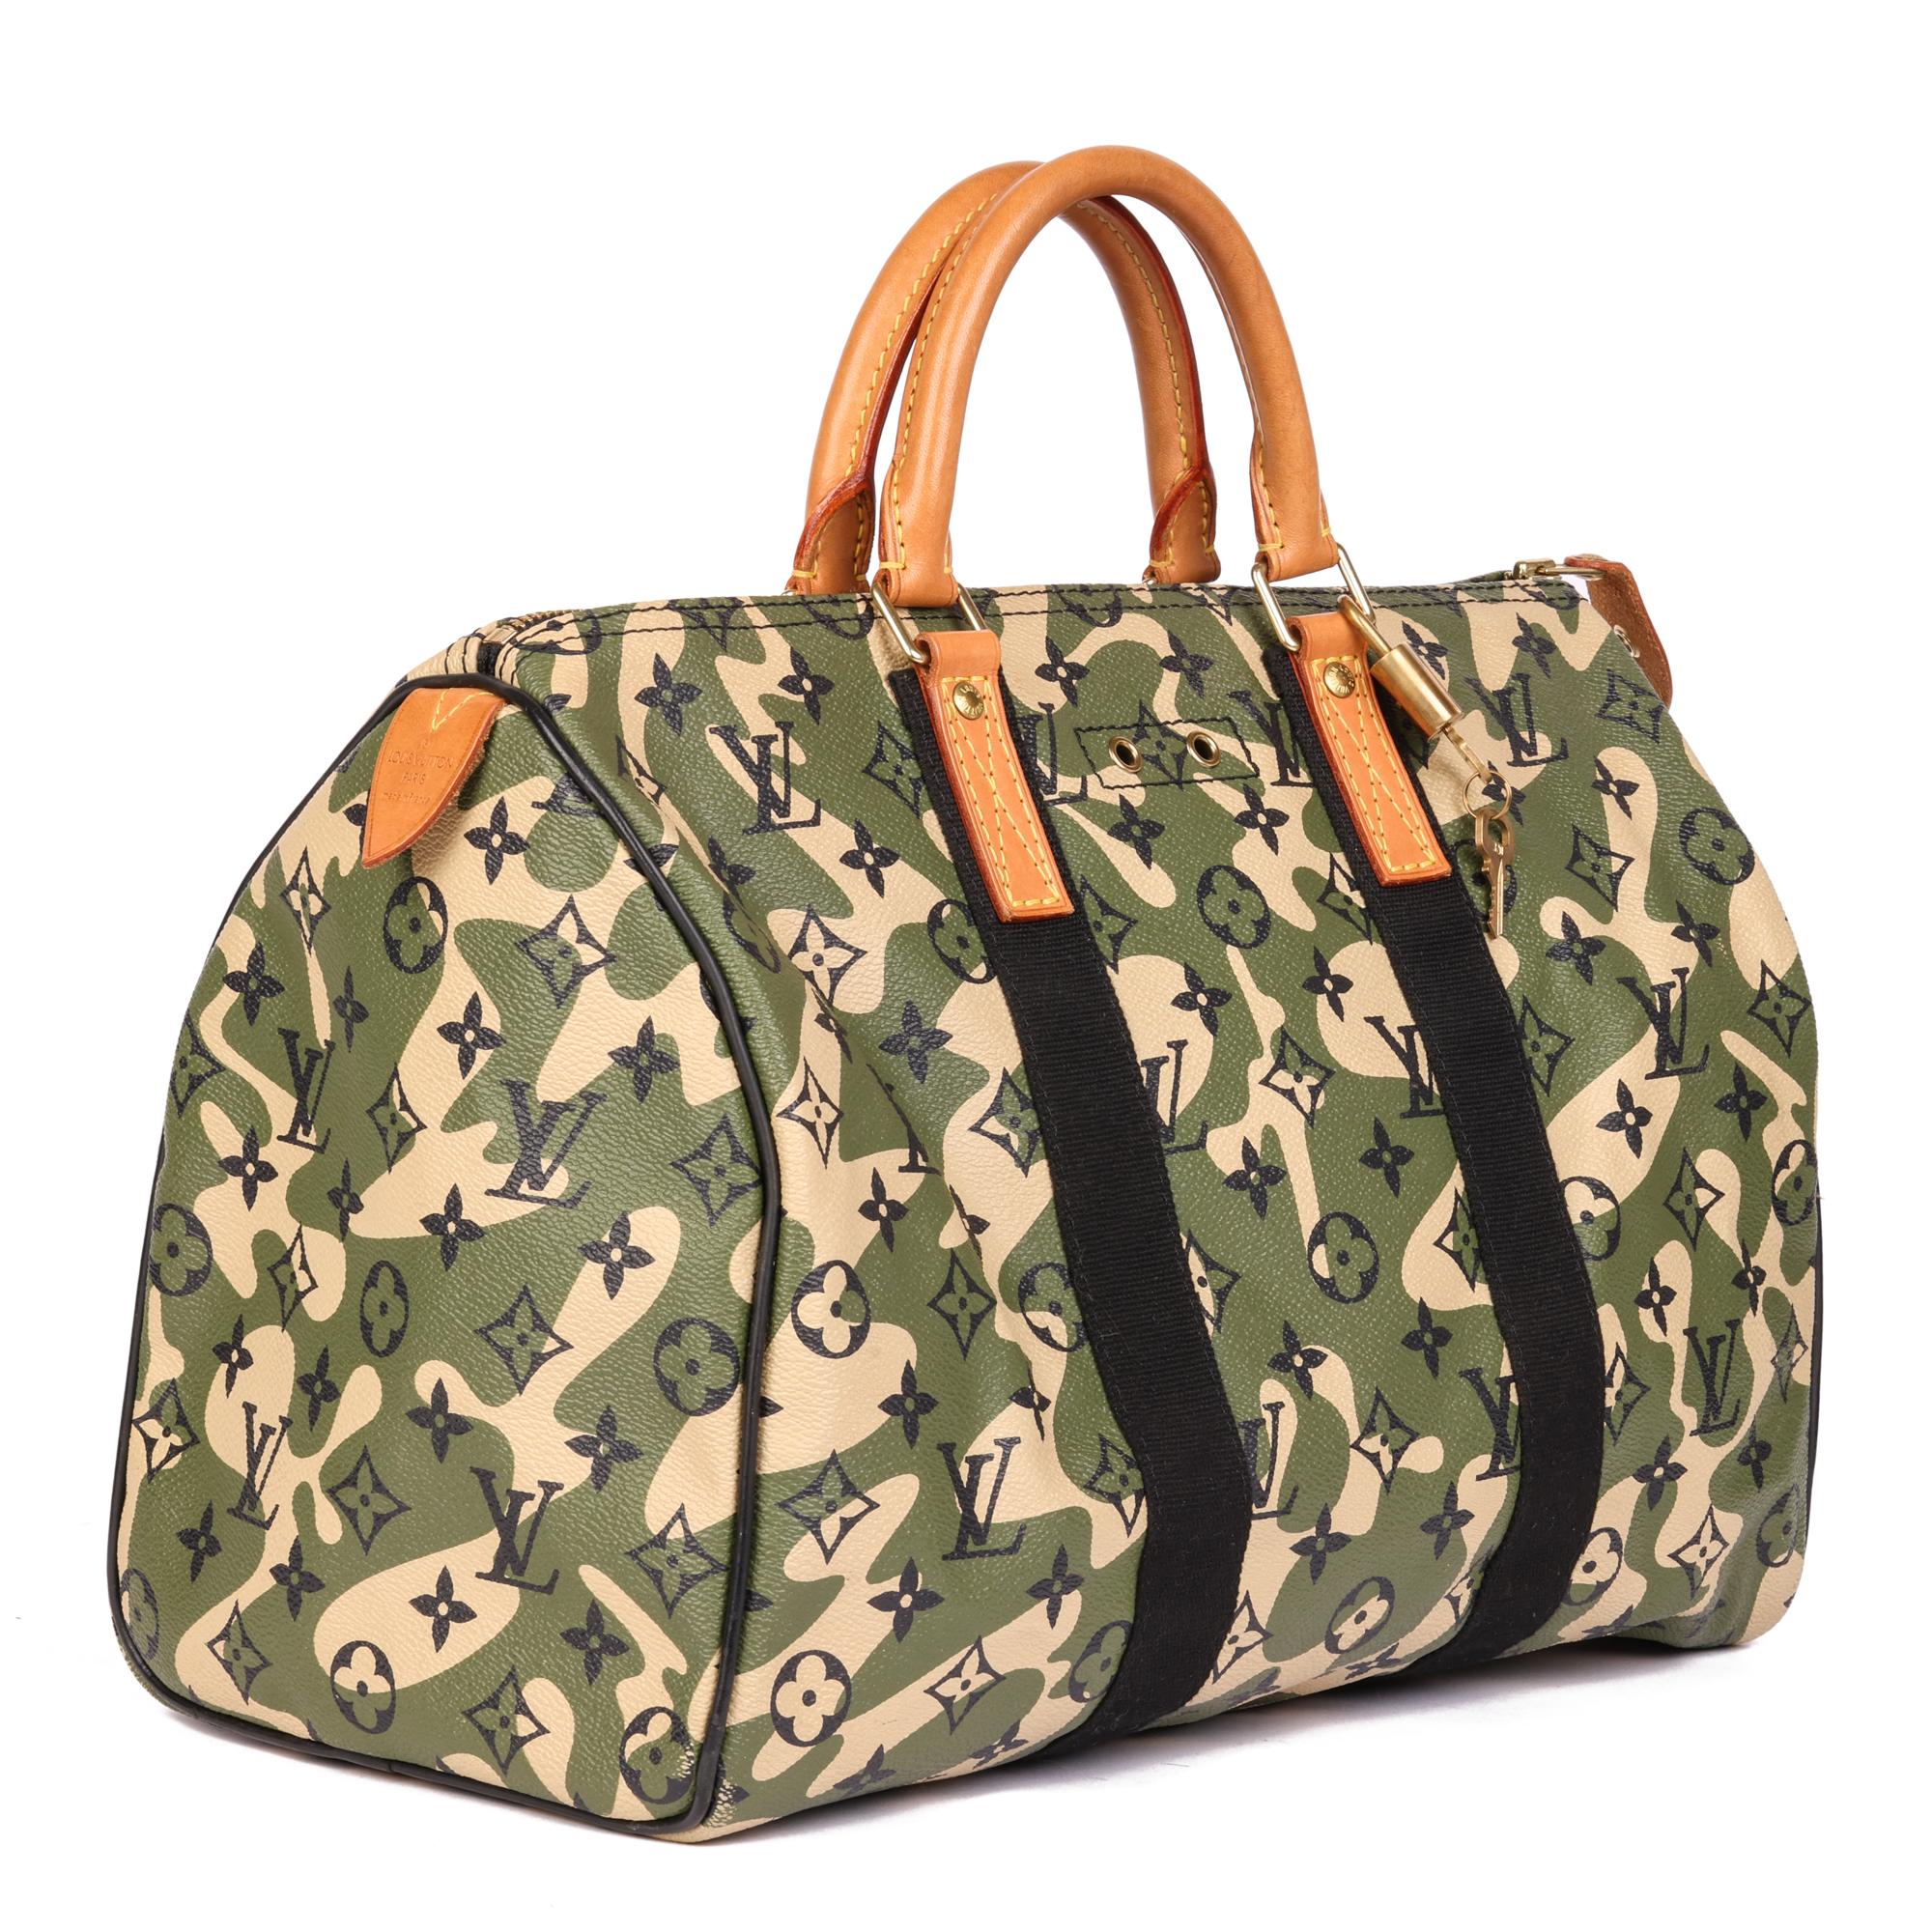 LOUIS VUITTON
Green Monogramouflage Coated Canvas & Vachetta Leather Murakami Speedy 35

Serial Number: AA2028
Age (Circa): 2008
Accompanied By: Louis Vuitton Dust Bag
Authenticity Details: Date Stamp (Made in France)
Gender: Ladies
Type: